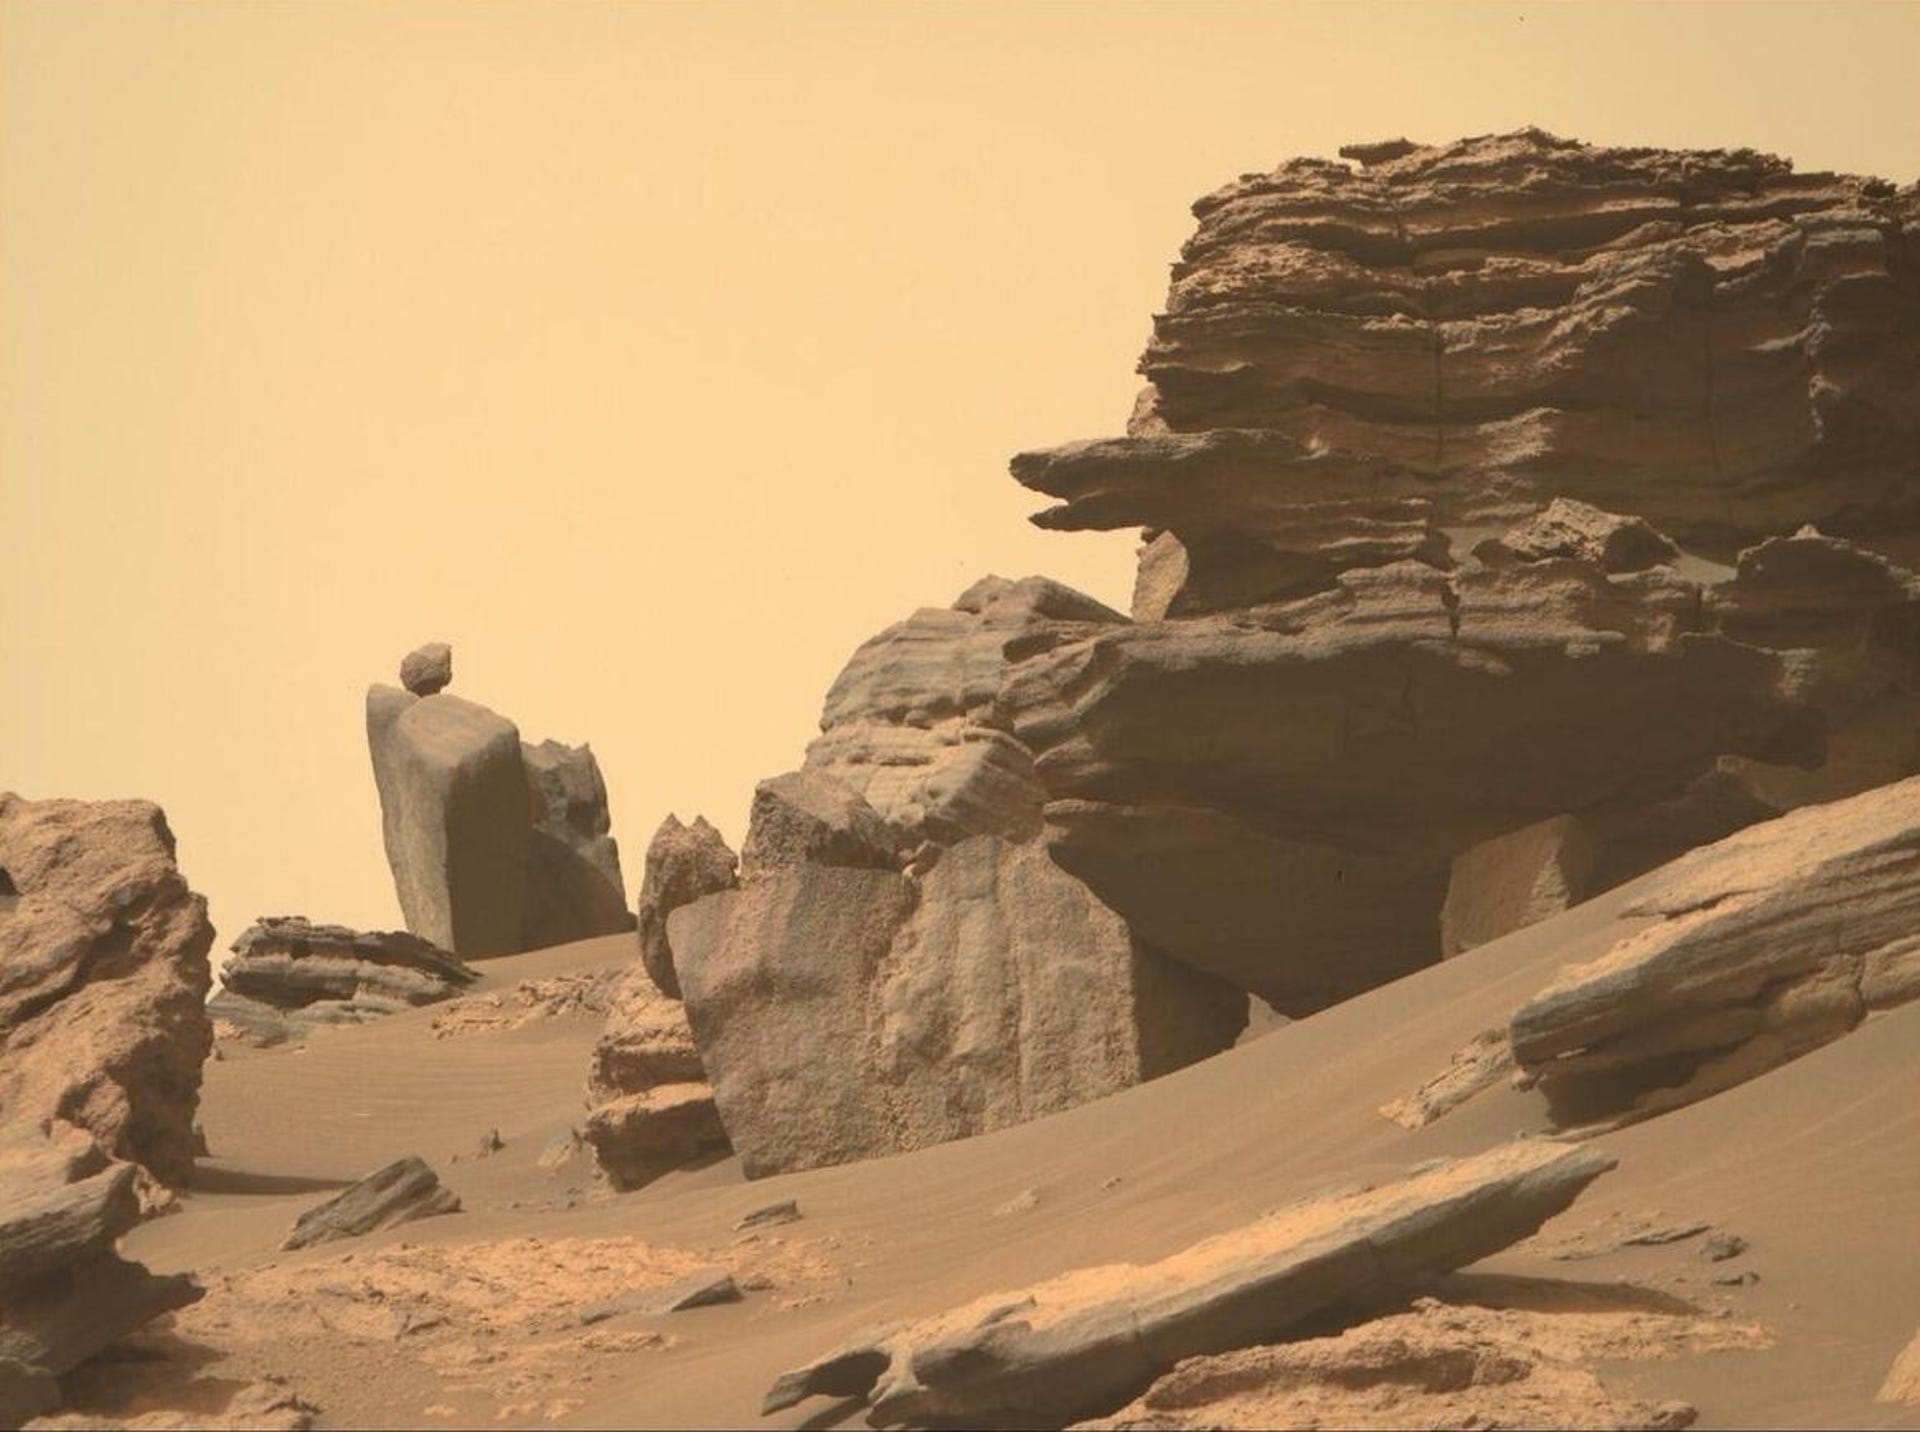 A Mars landscape shows a layered cliff face with a nearby small round rock appearing to be impressively balanced atop a larger rock.